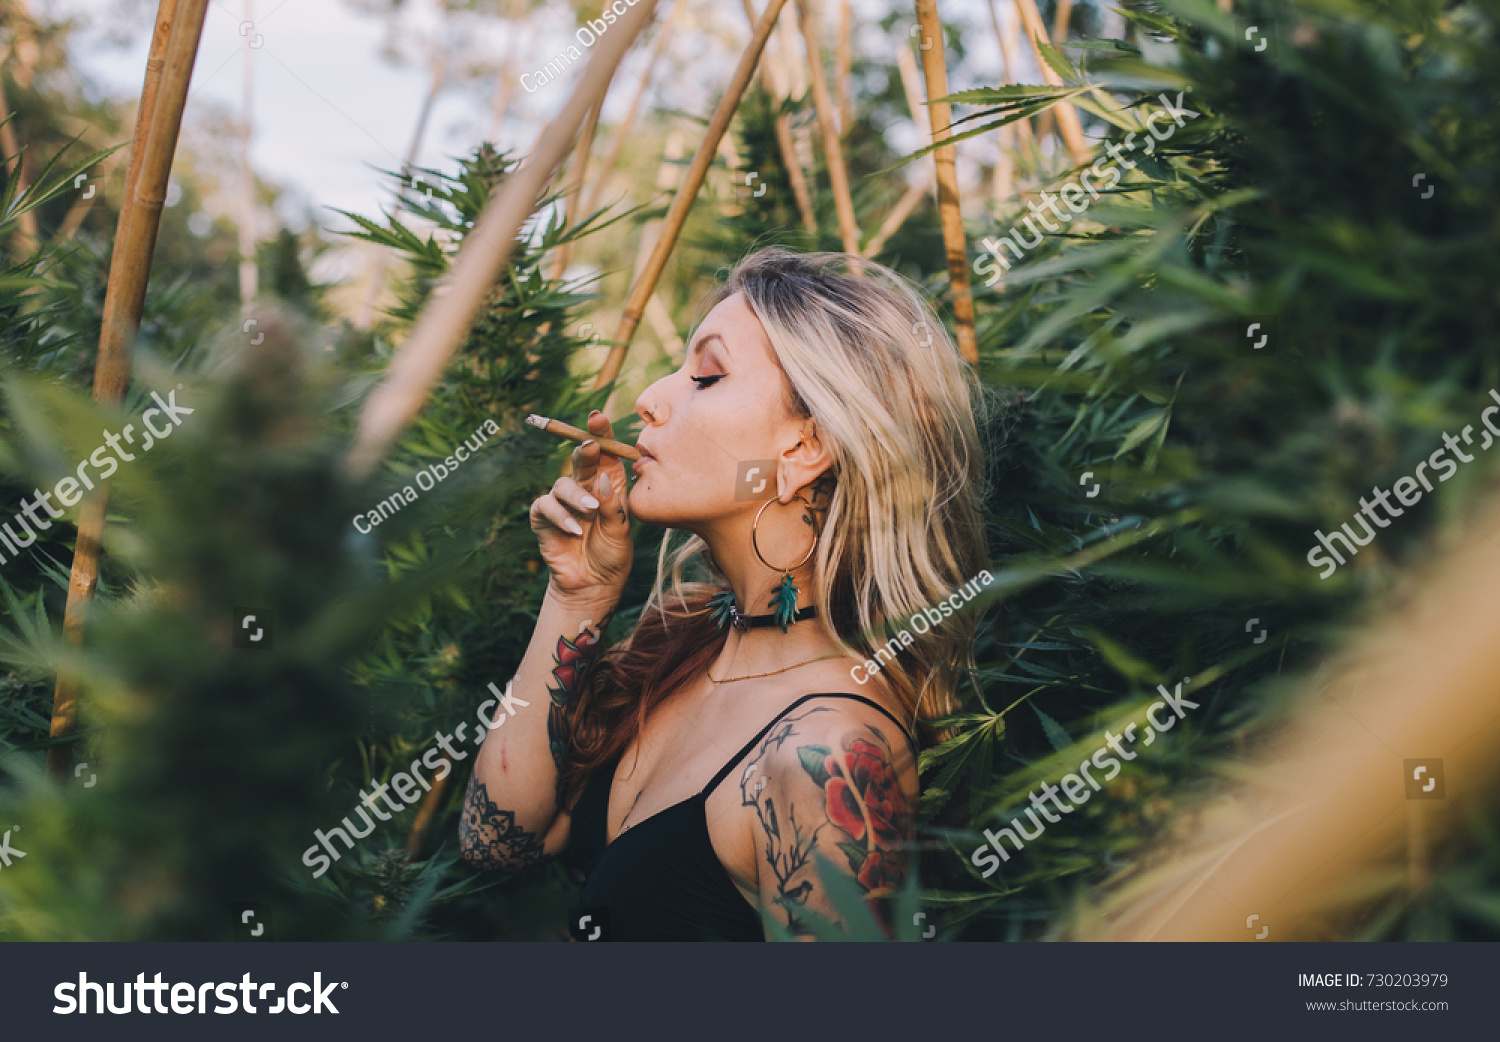 becky friedrich recommends beautiful women smoking weed pic